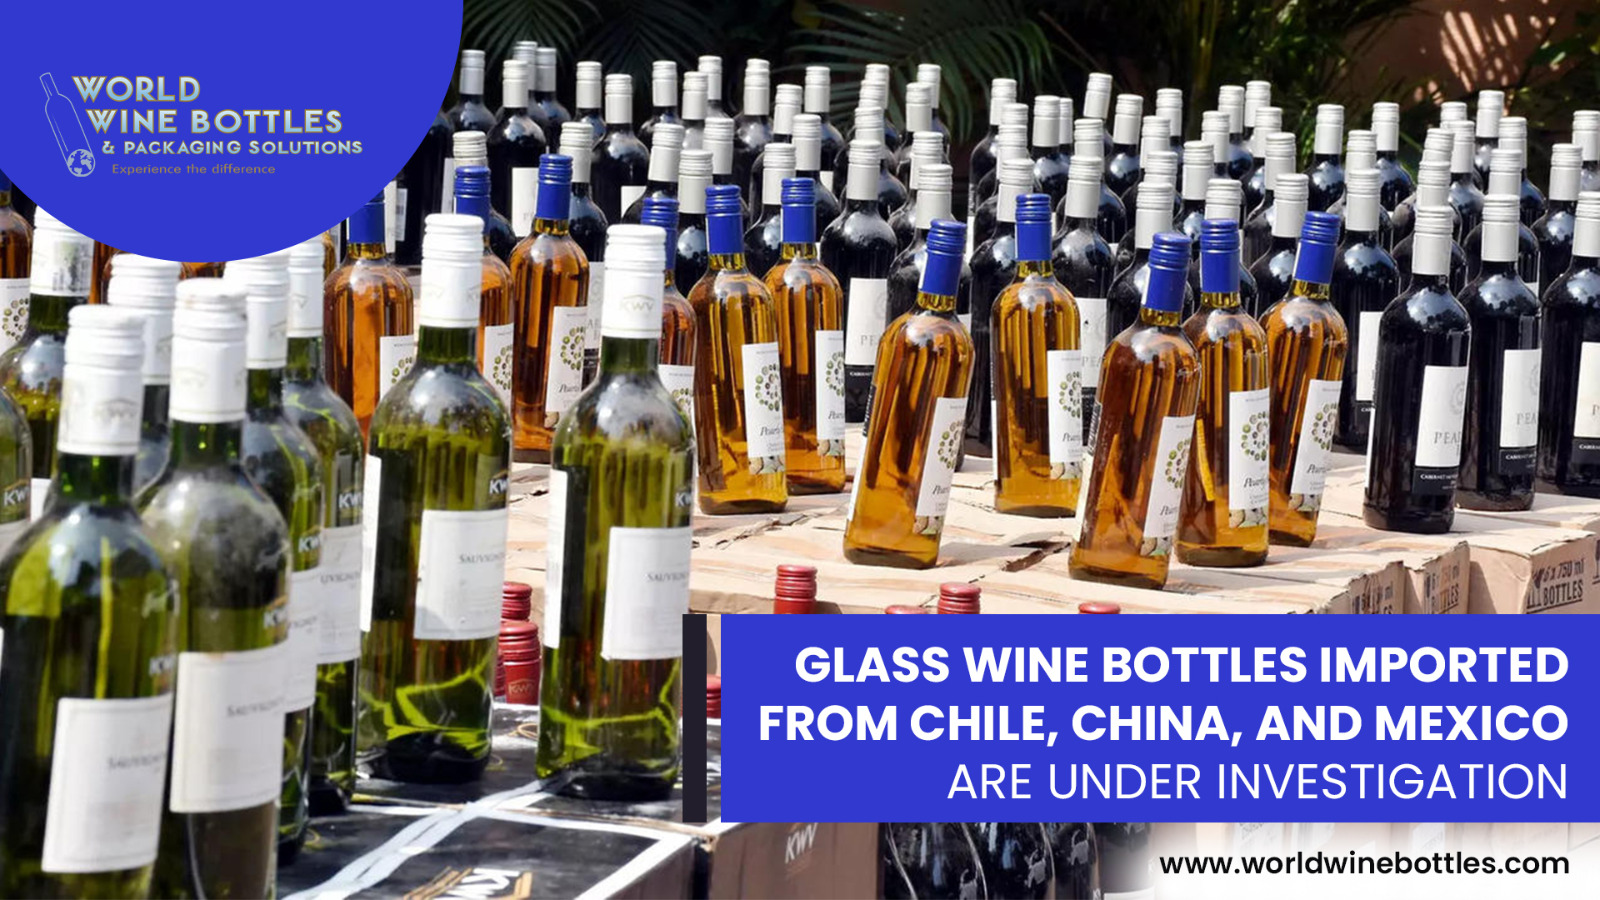 Glass Wine Bottles Imported from Chile, China, and Mexico Are Under Investigation